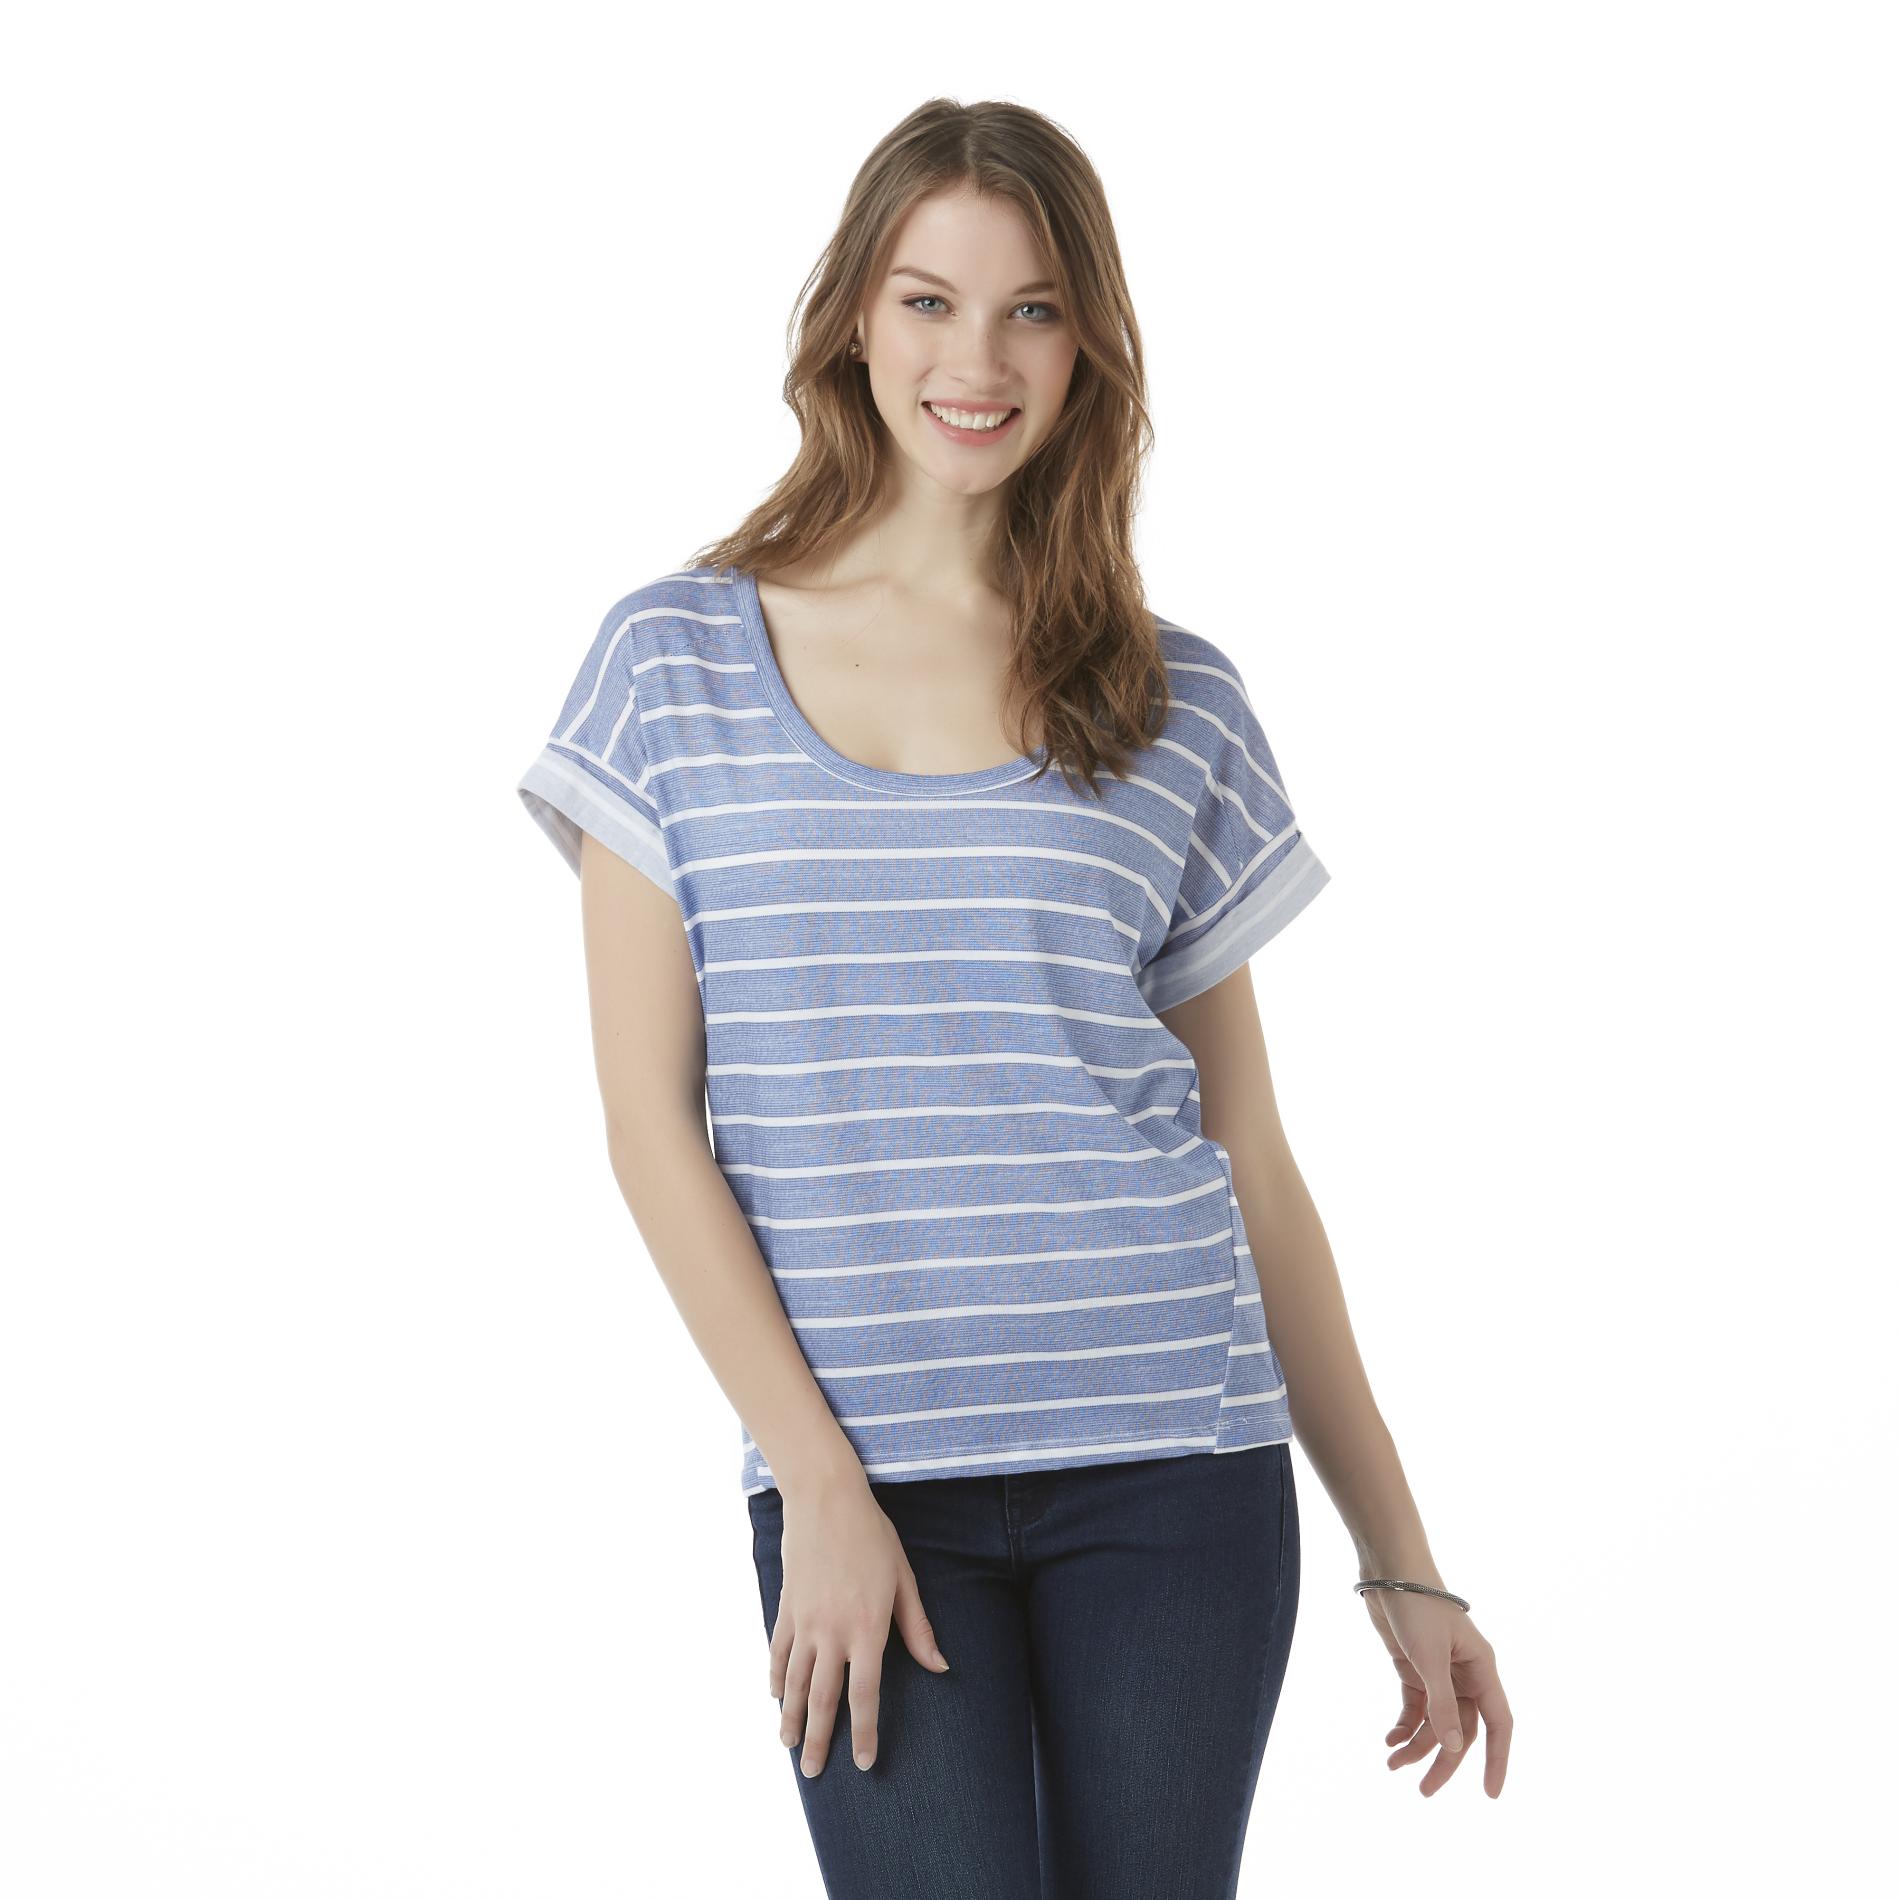 Simply Styled Women's Boxy T-Shirt - Striped